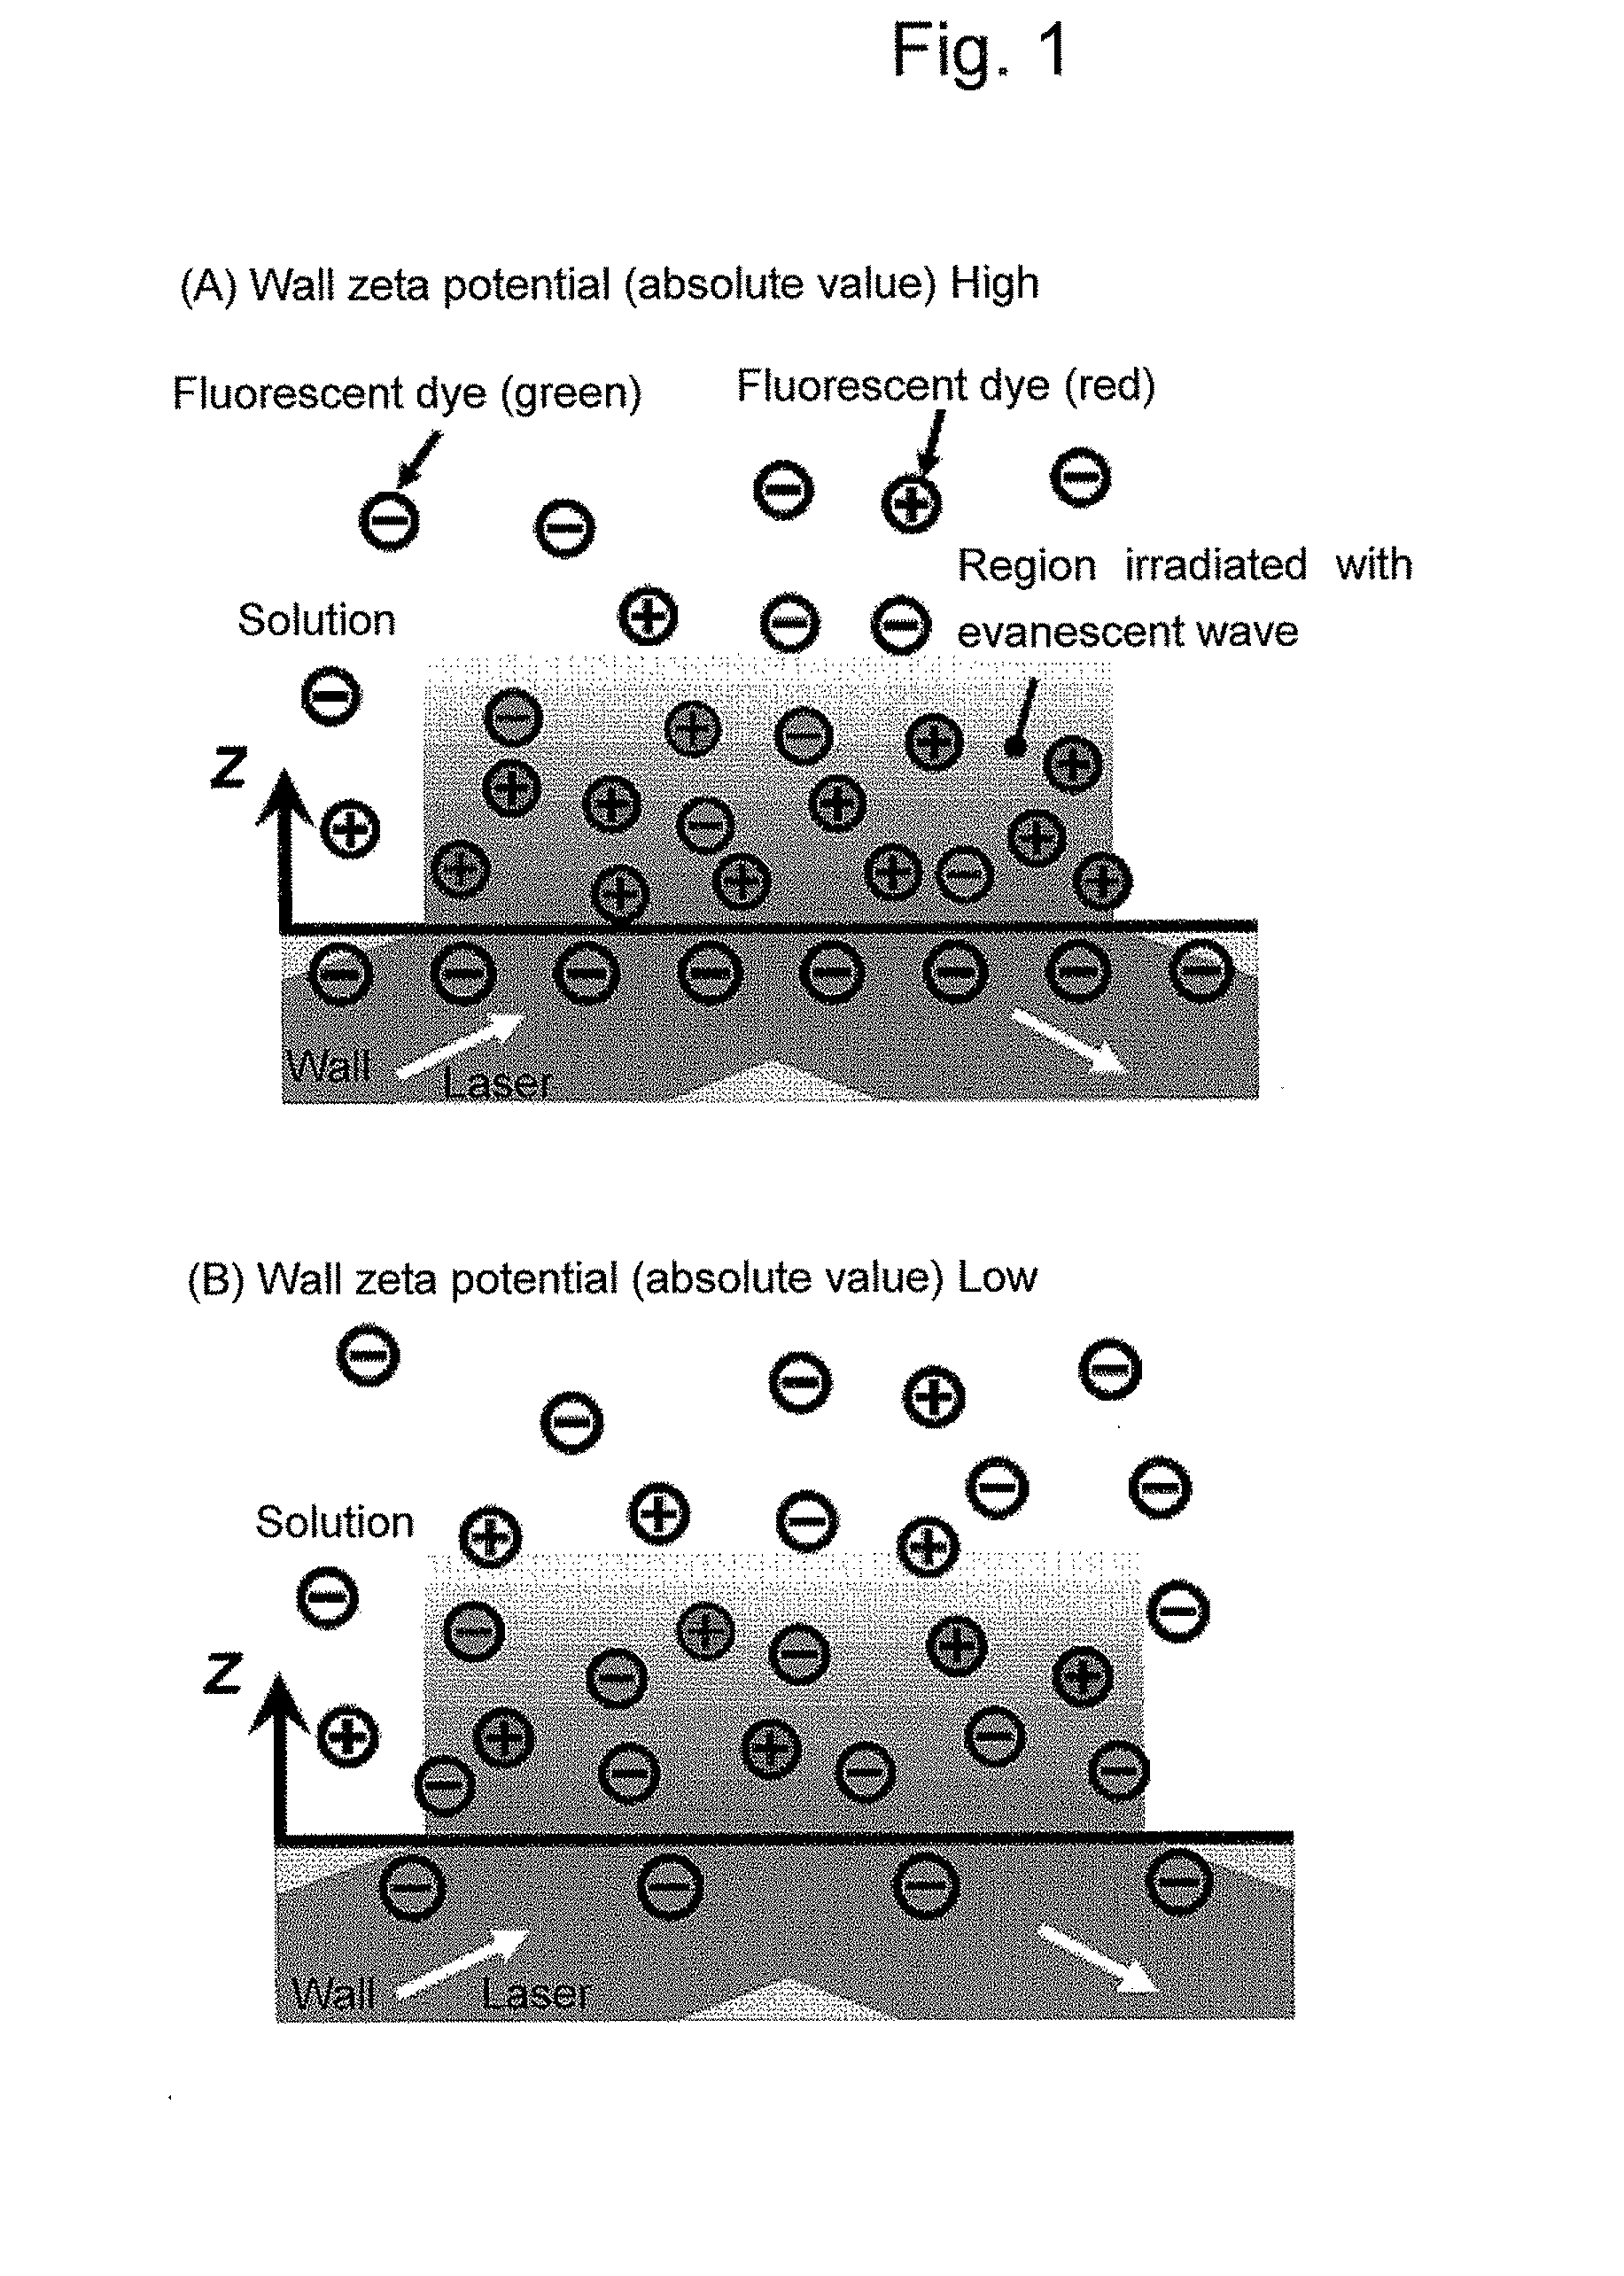 Method and apparatus for quantitative evaluation of wall zeta-potential, and method and apparatus for quantitative visualization of surface modification pattern